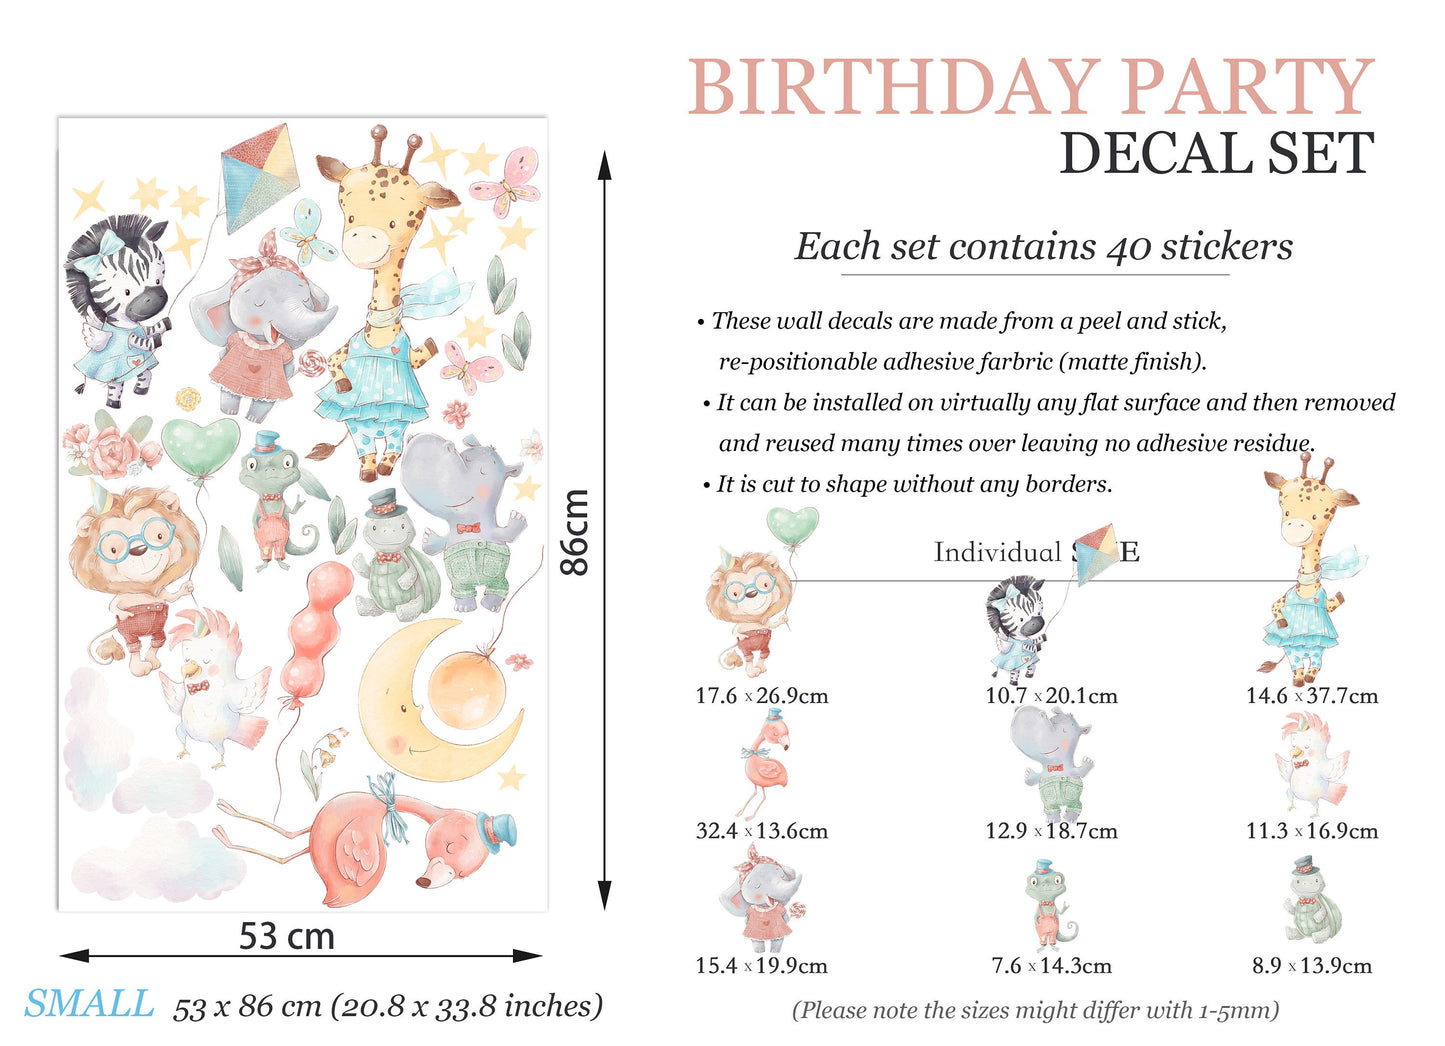 Animal Party Wall Decal - Giraffe, Elephant, Zebra with Balloons - Removable Peel and Stick - BR163